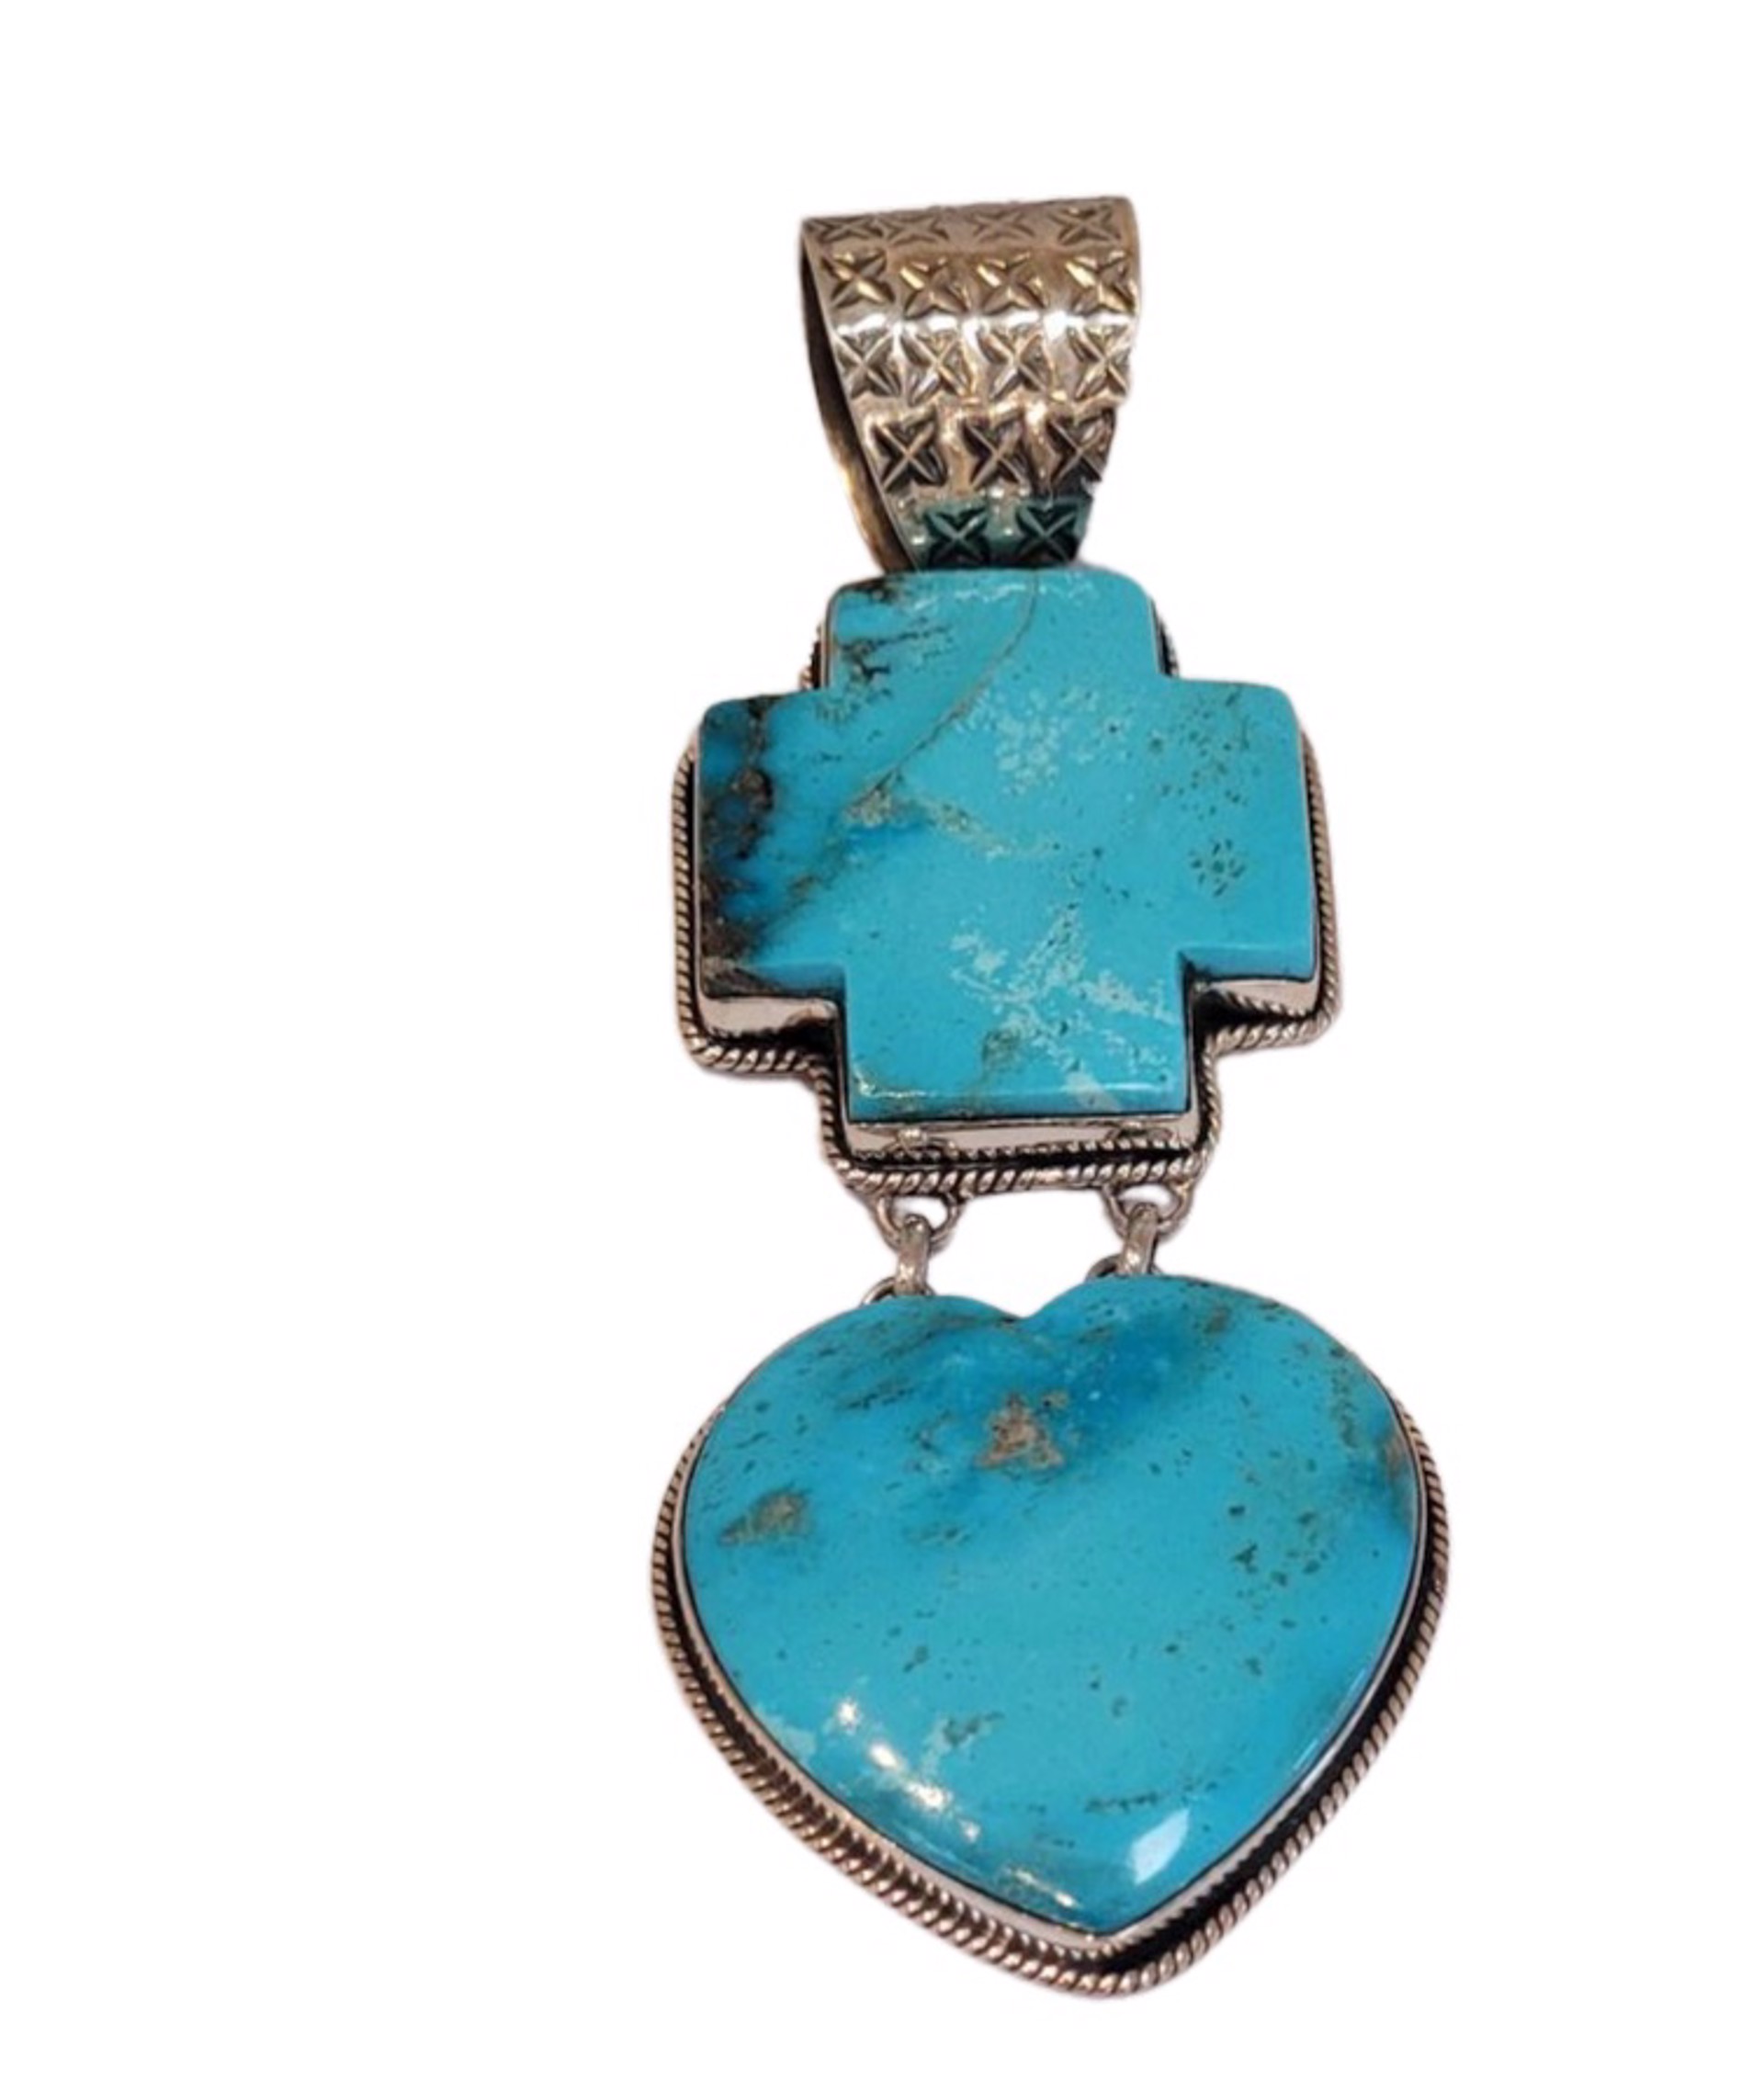 Pendant - Turquoise Cross & Heart with Sterling Silver by Dan Dodson